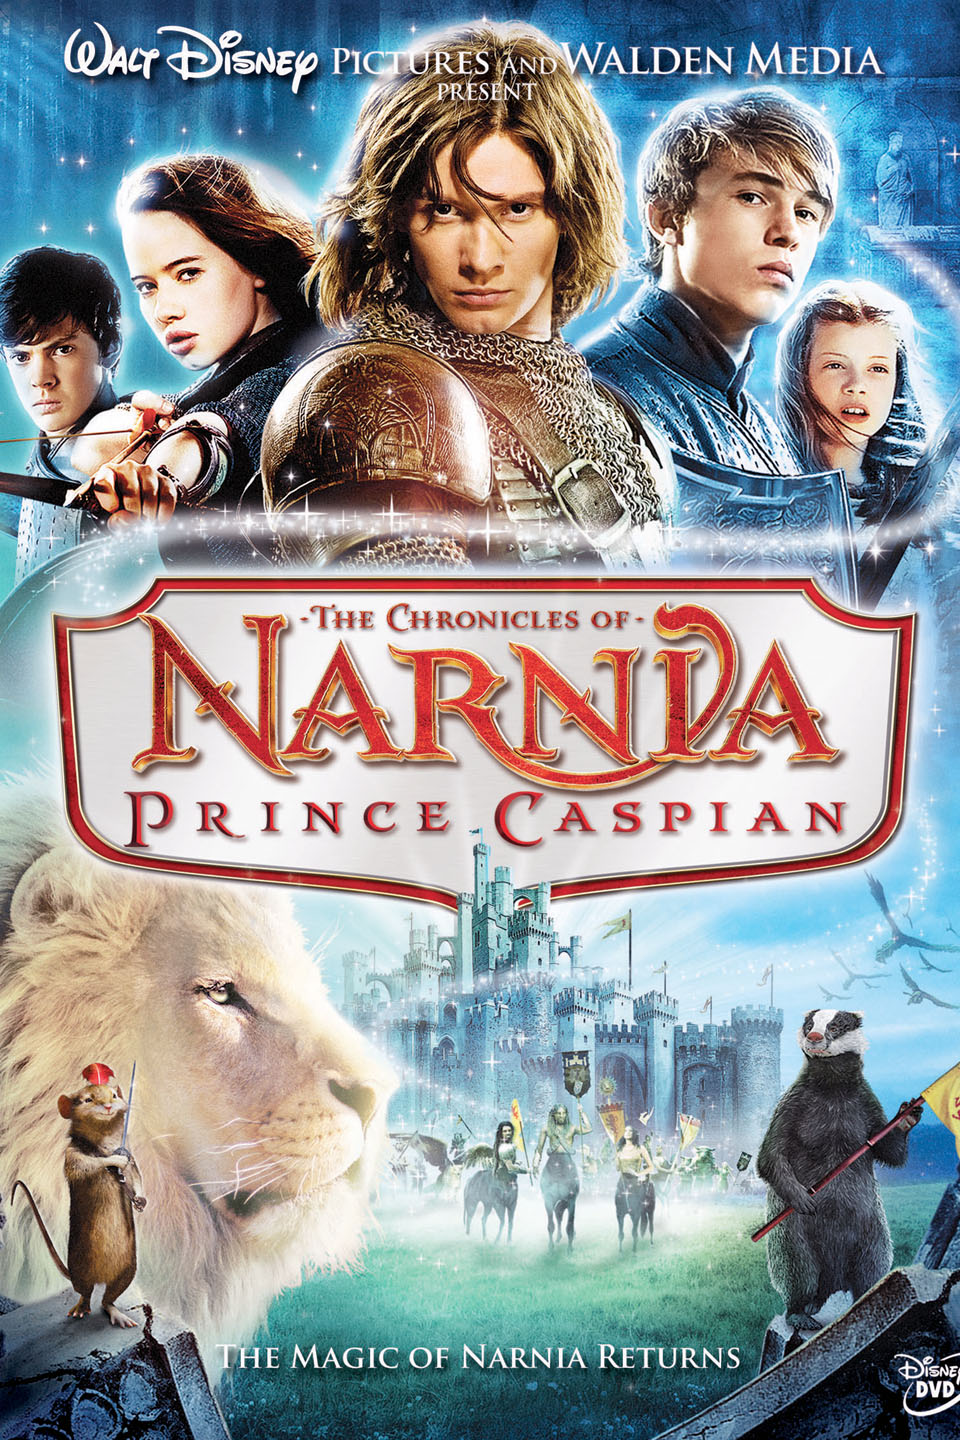 The Chronicles of Narnia: Prince Caspian: Trailer 1 - Trailers & Videos ...